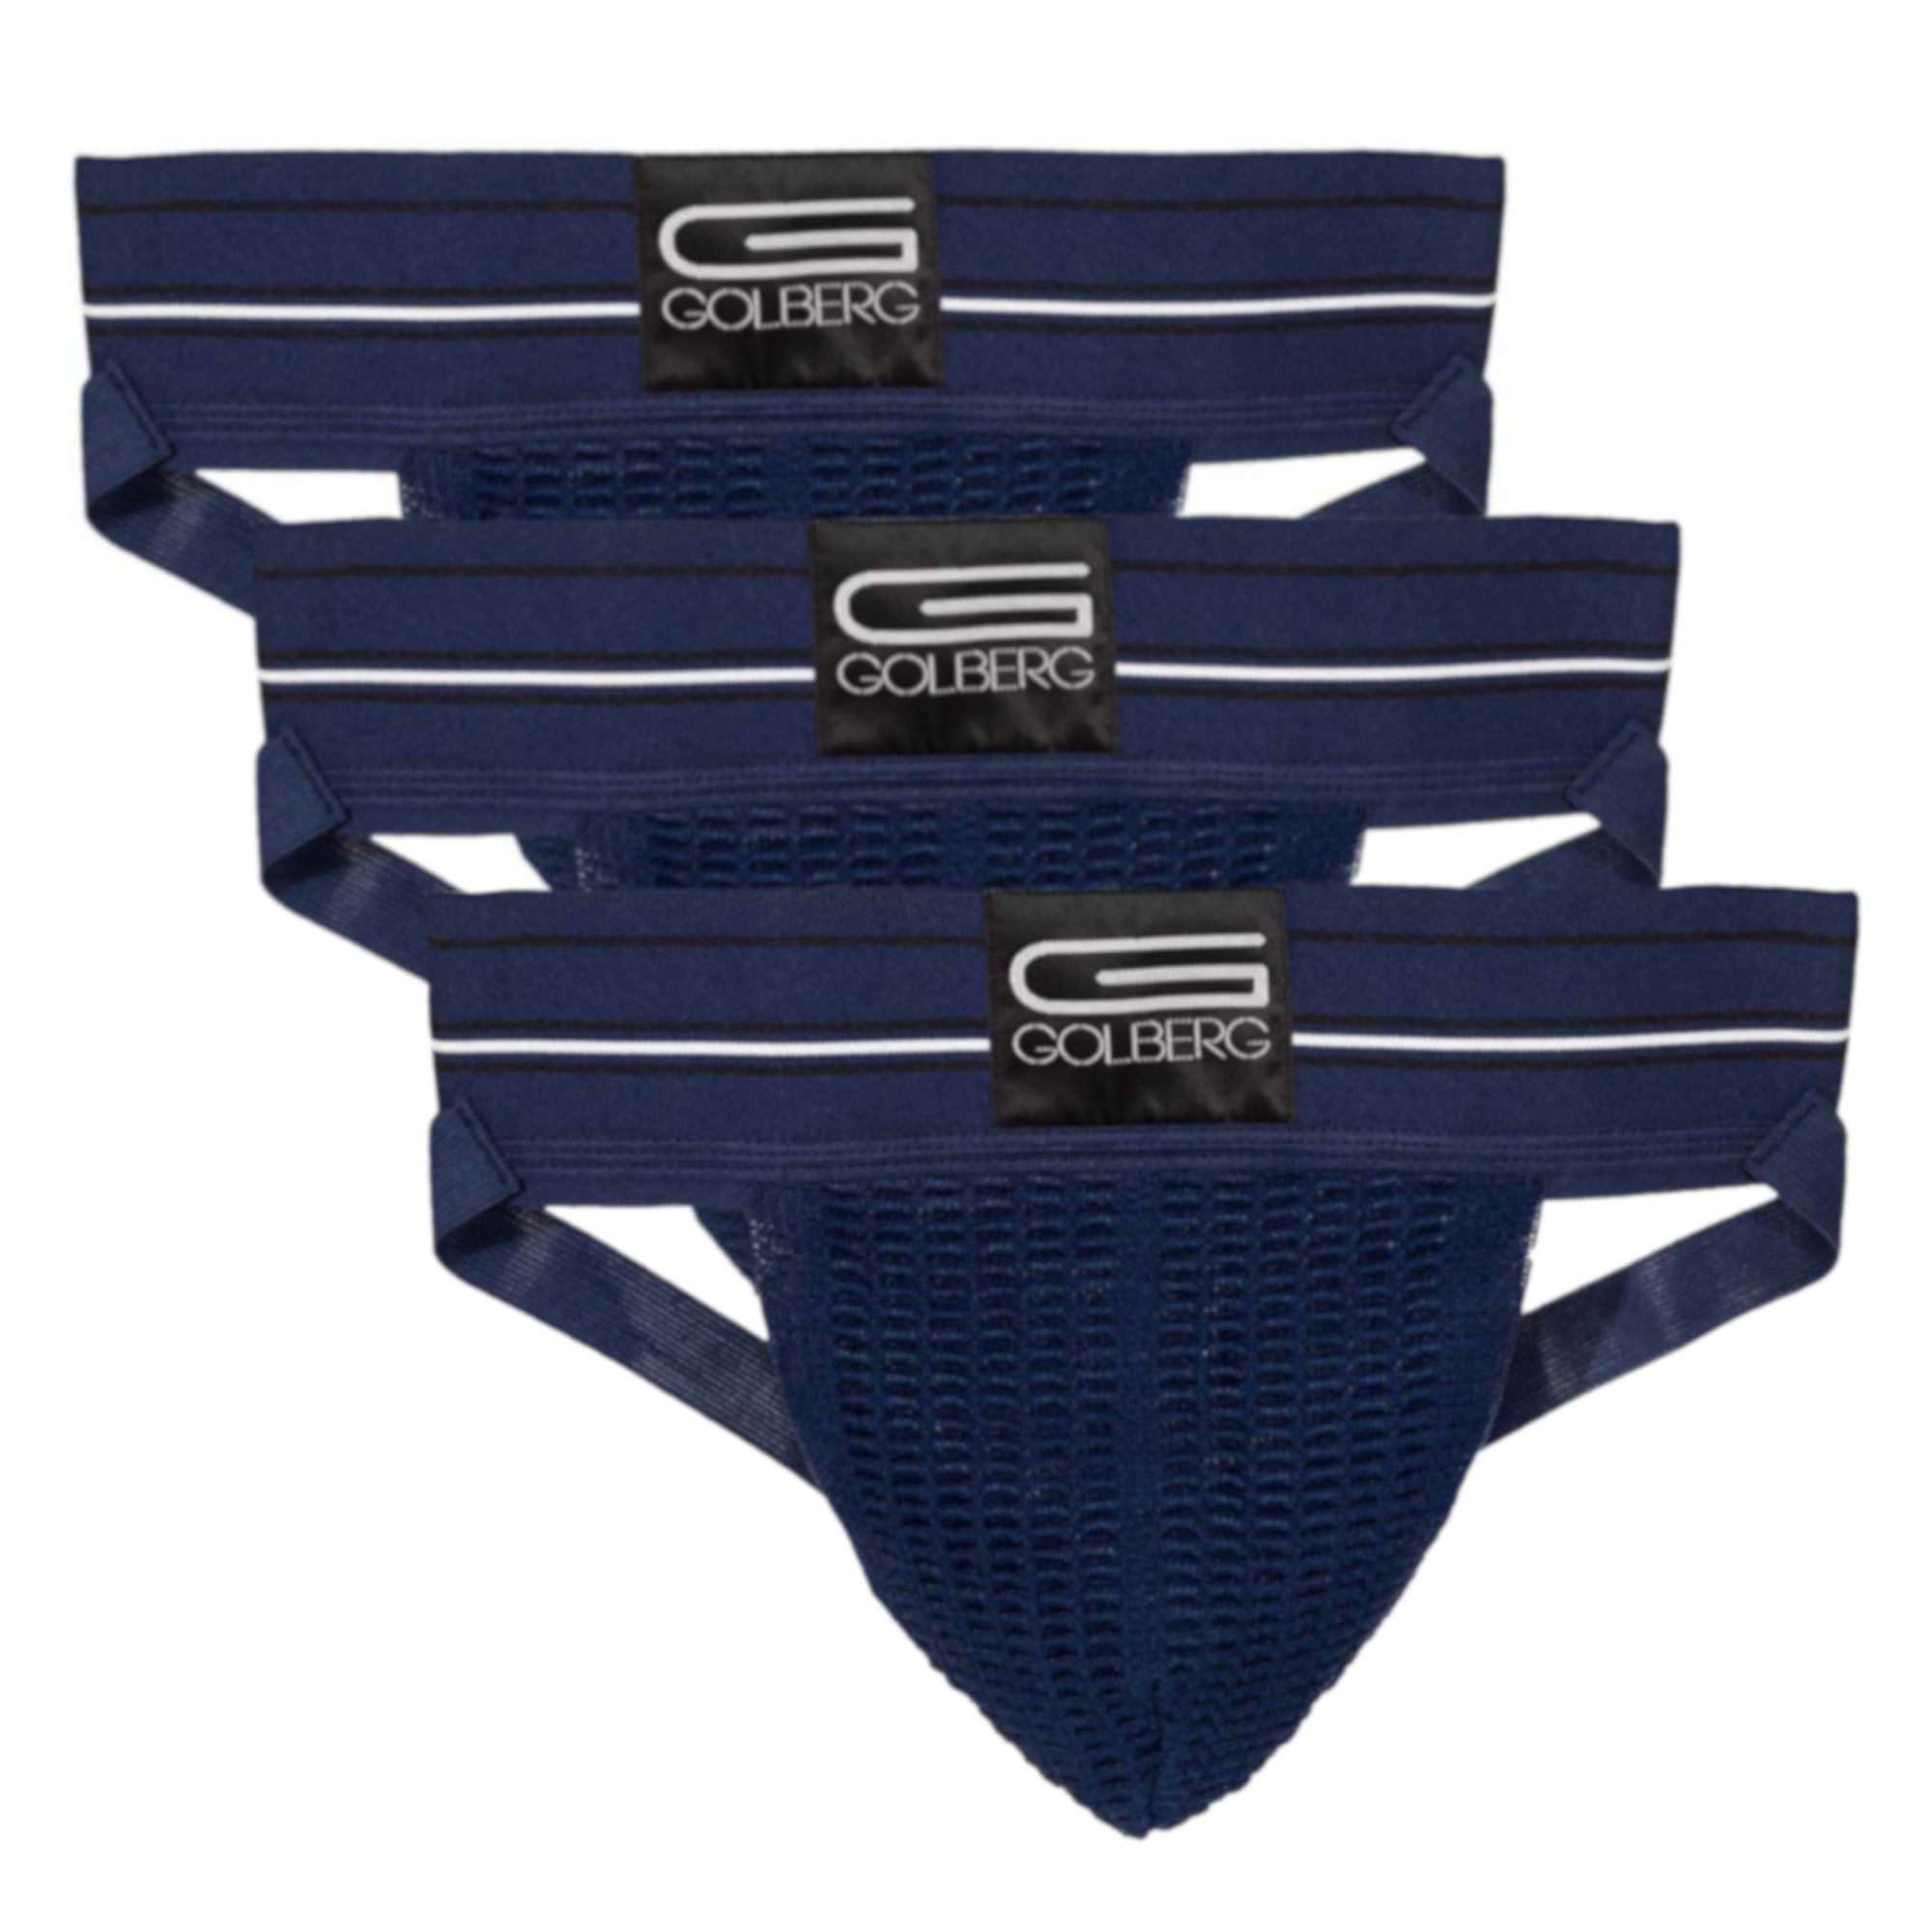 Large and X-Large Black and Gray Color Options GOLBERG G Jock Strap with Cup Medium Small Size Options of X-Small 